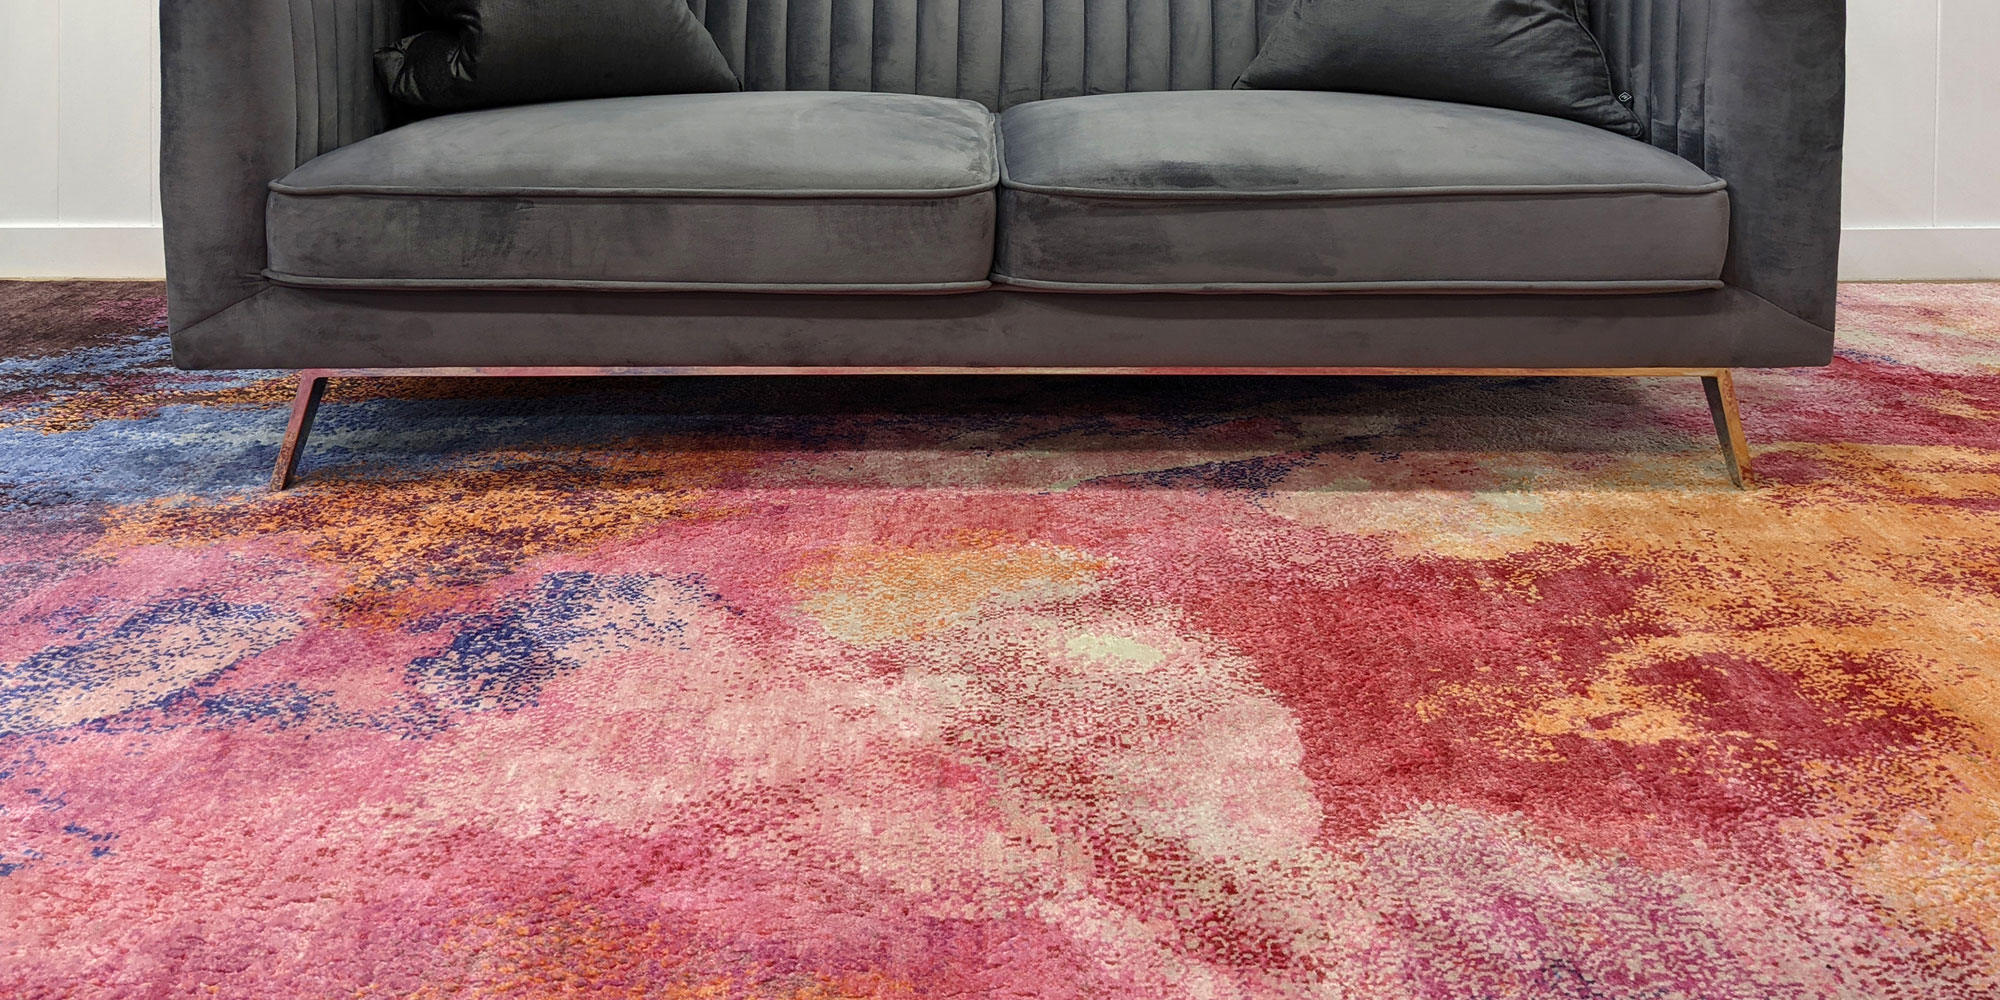 Top 7 Rugs to liven up your home